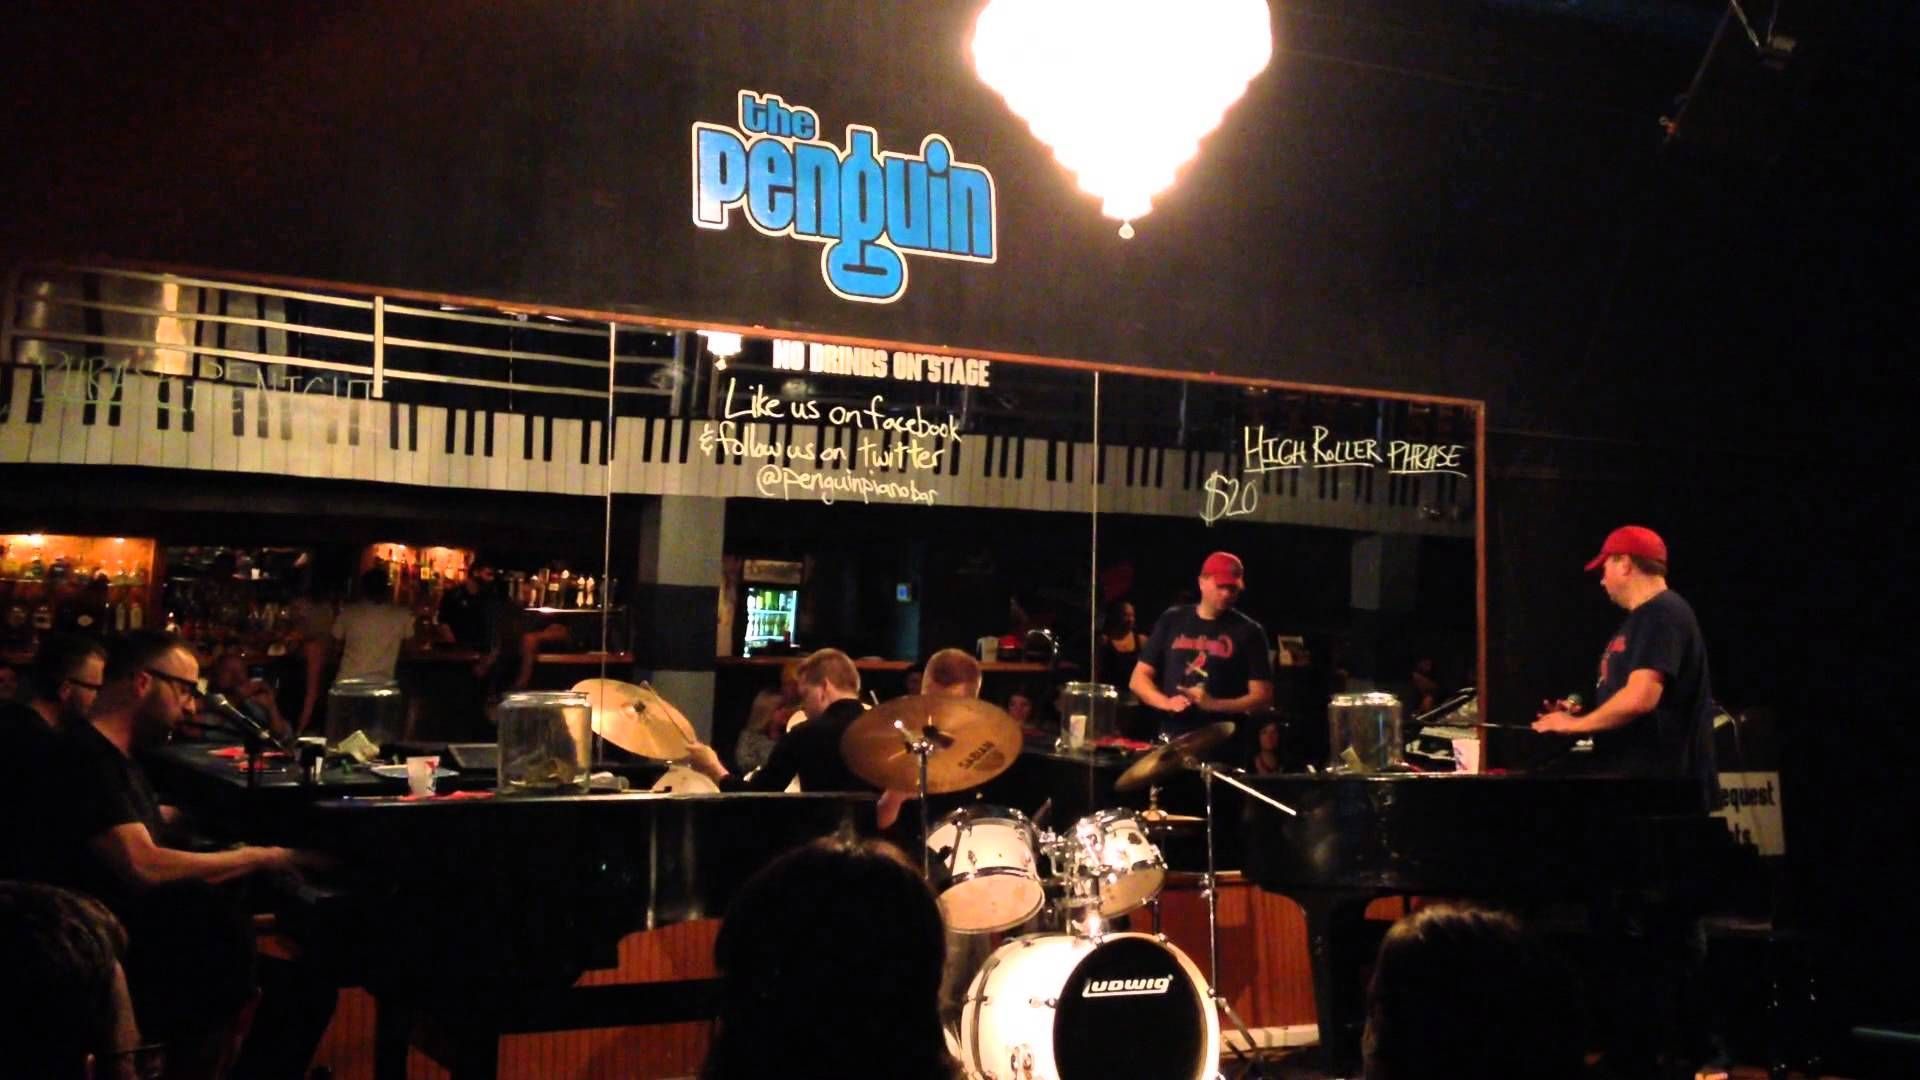 The Penguin Piano Bar & Restaurant Has Been a Loved Nightclub in Columbia, MO Since 2004.